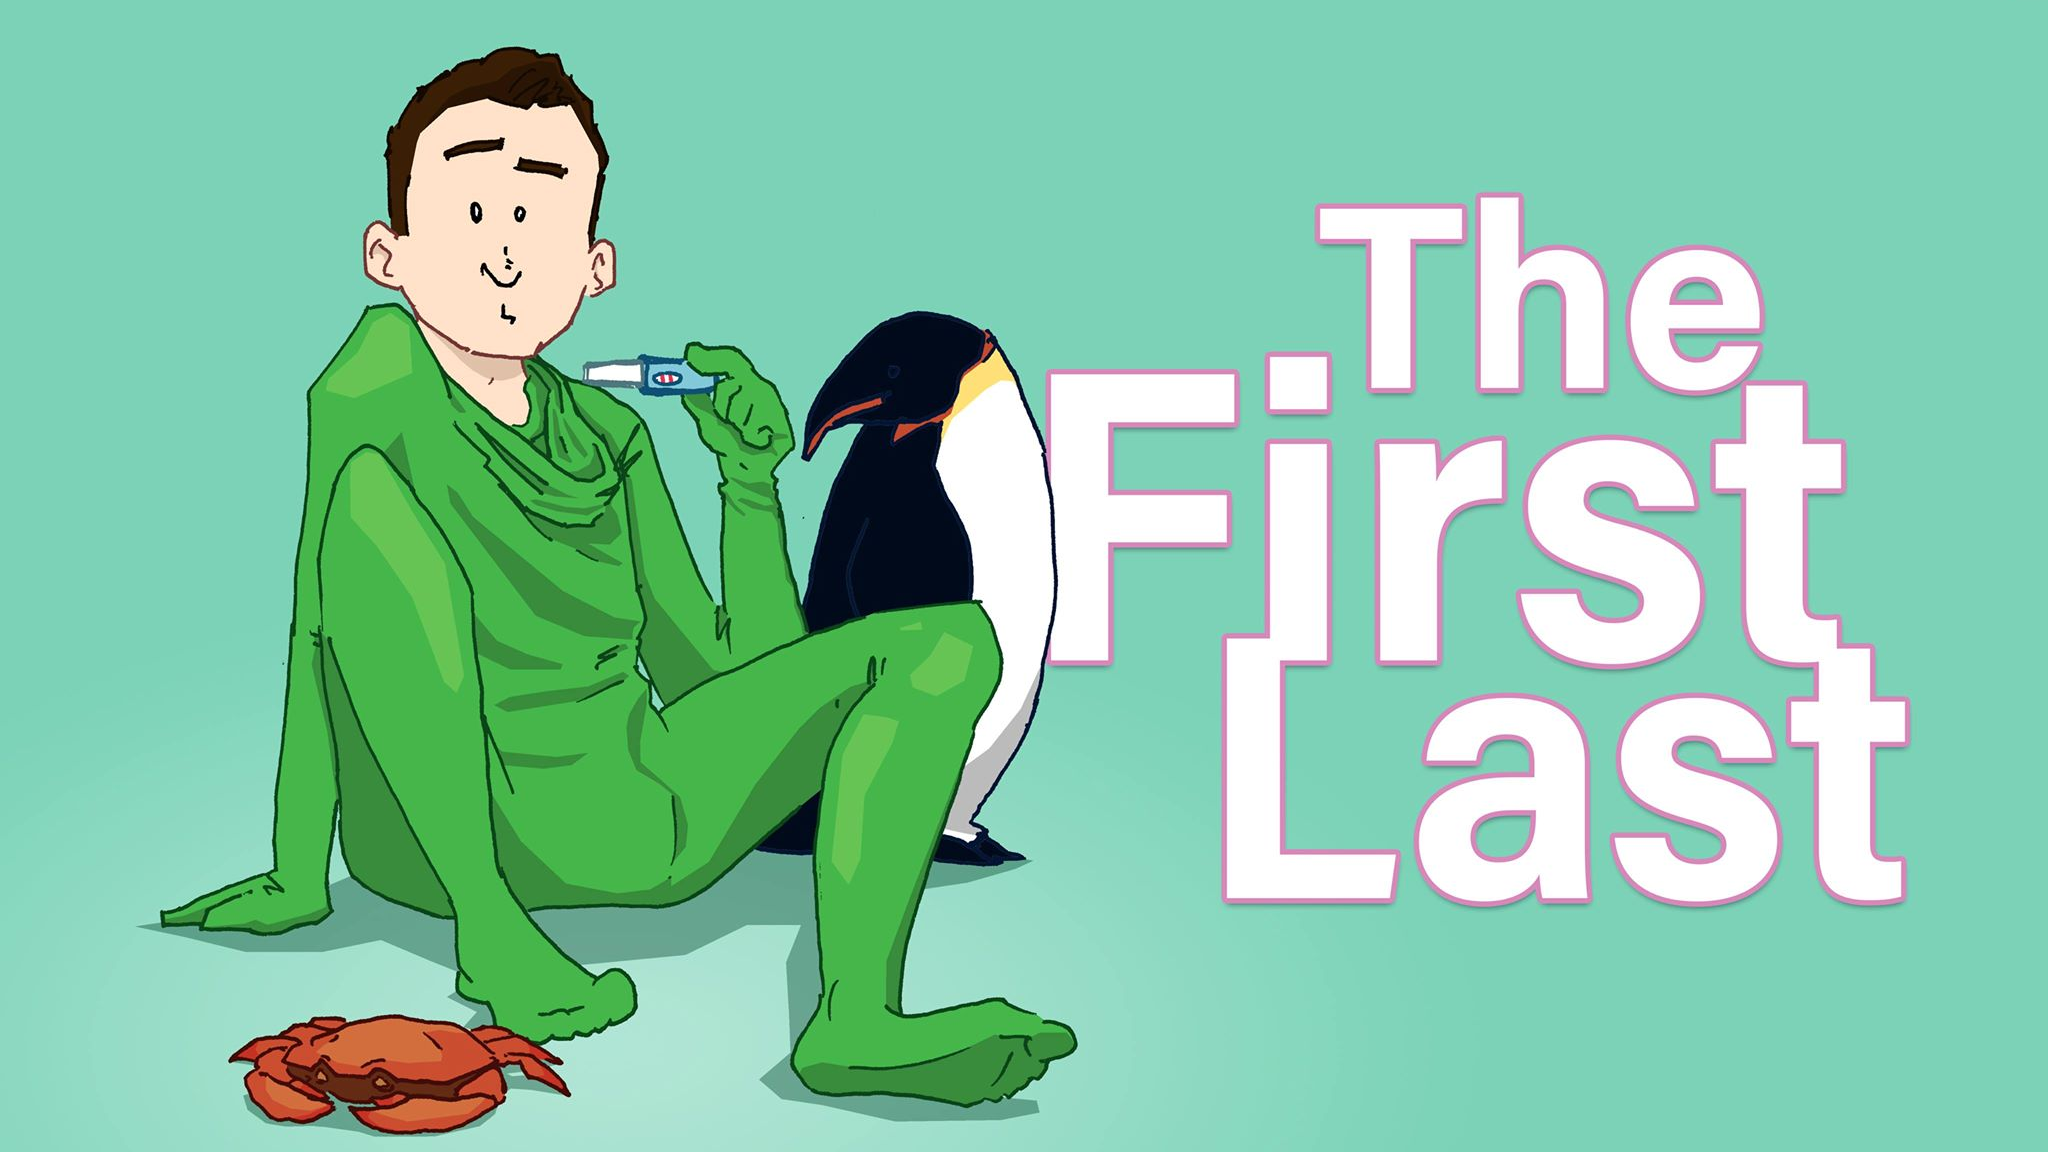 A cartoon drawing of a young man in a green morph suit, holding a pregnancy test, with a penguin standing next to him and a crab next to his feet. The words 'The First Last' are written next to him